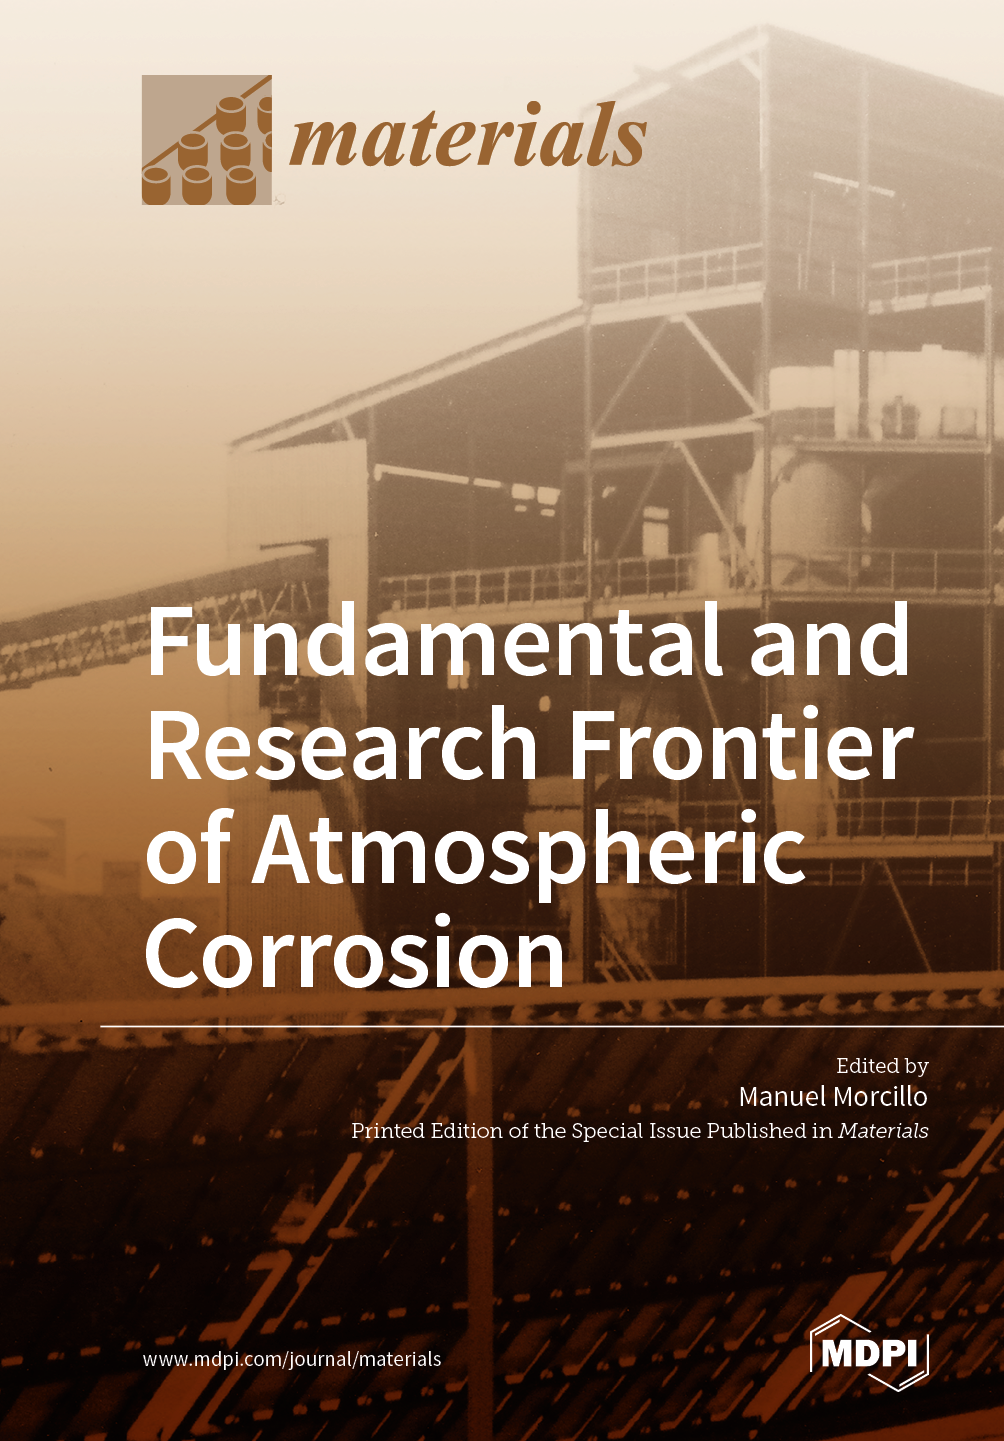 Fundamental and Research Frontier of Atmospheric Corrosion